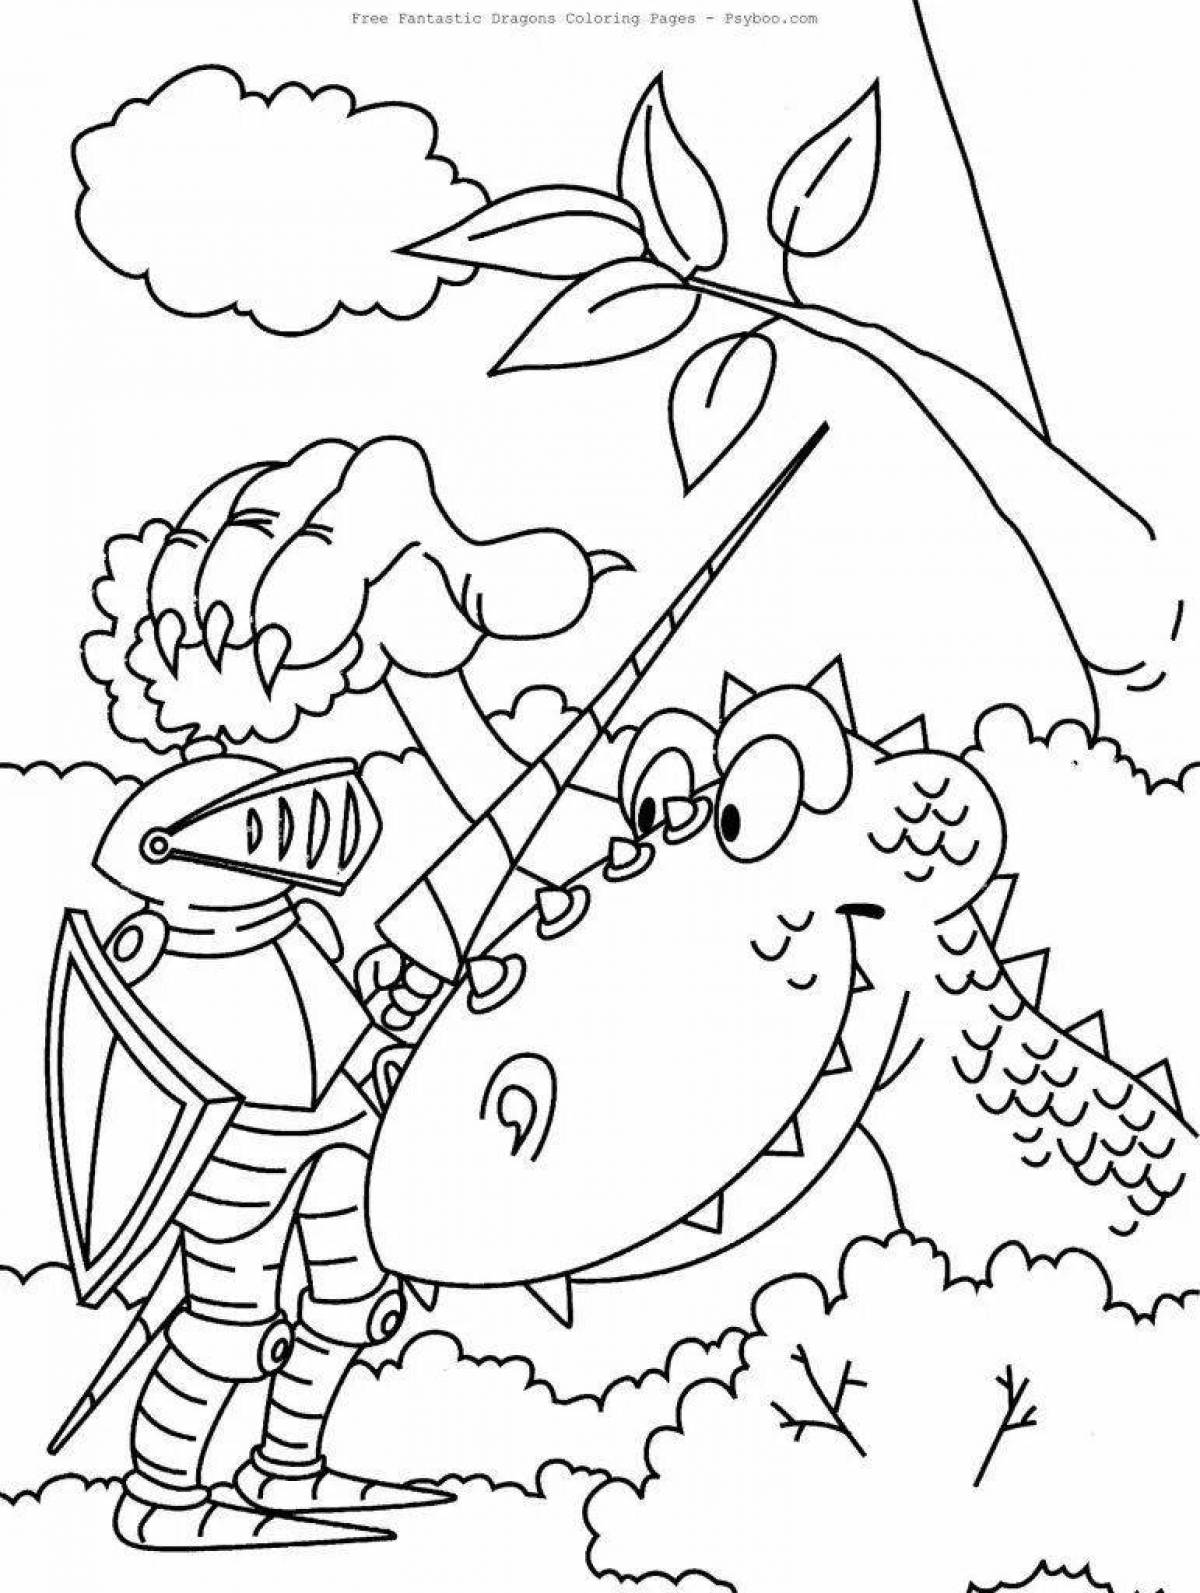 Coloring page glorious knight and dragon